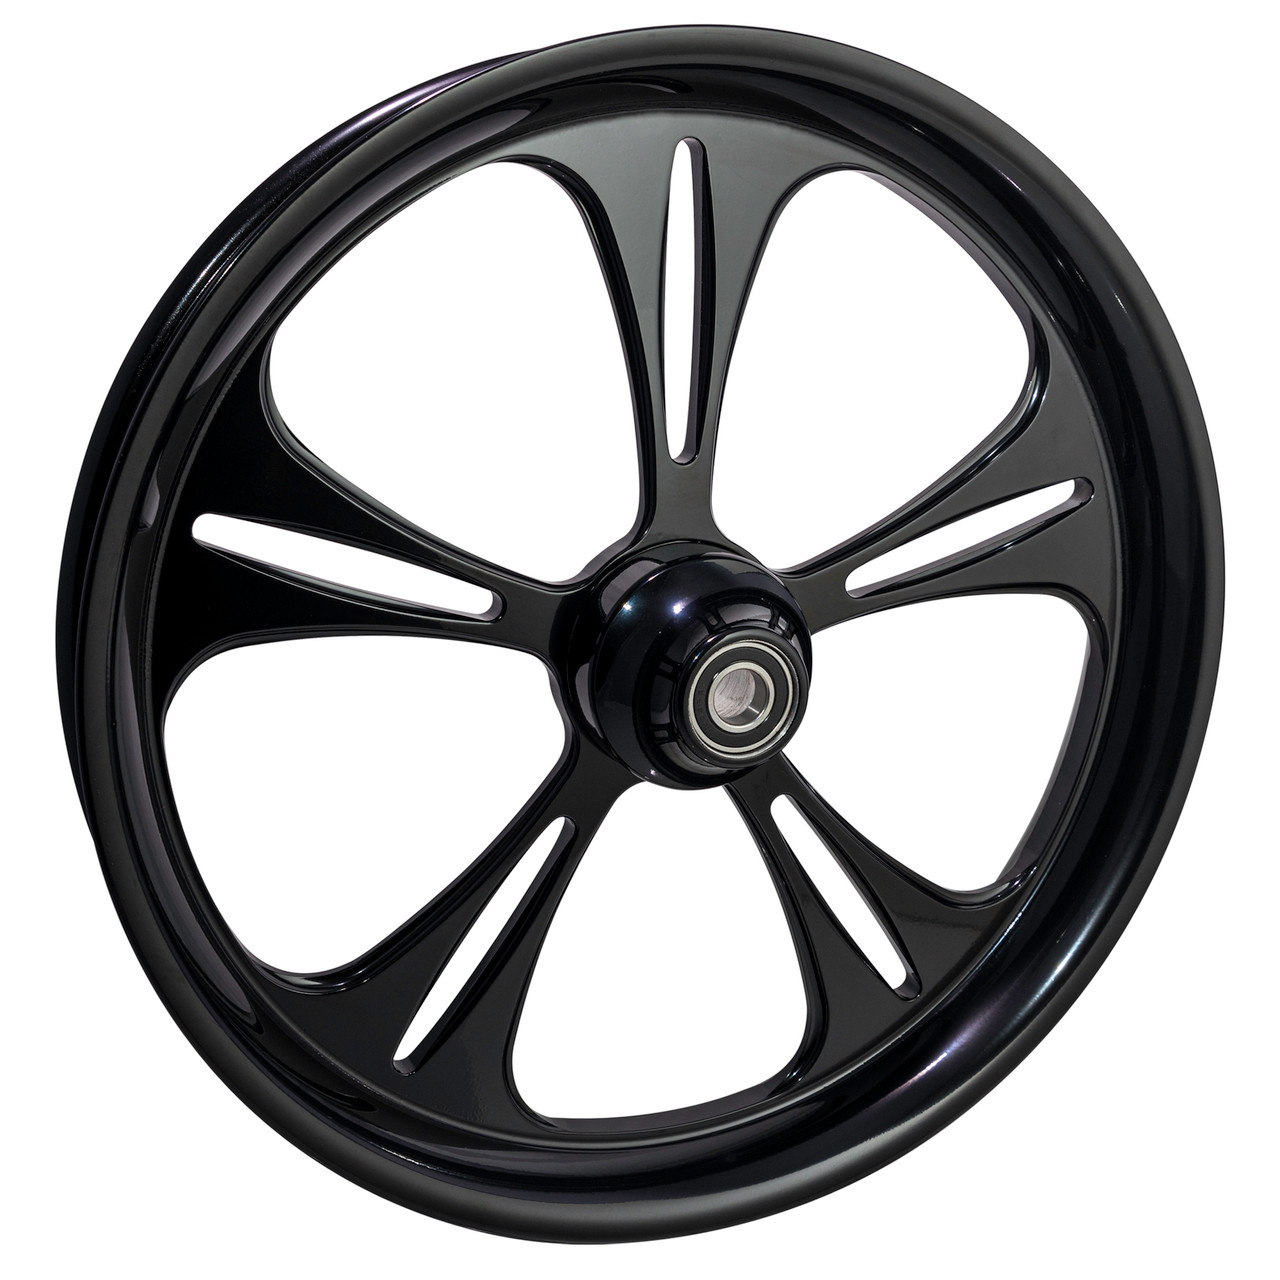 Black Contrast Fat front Tire Harley Wheels